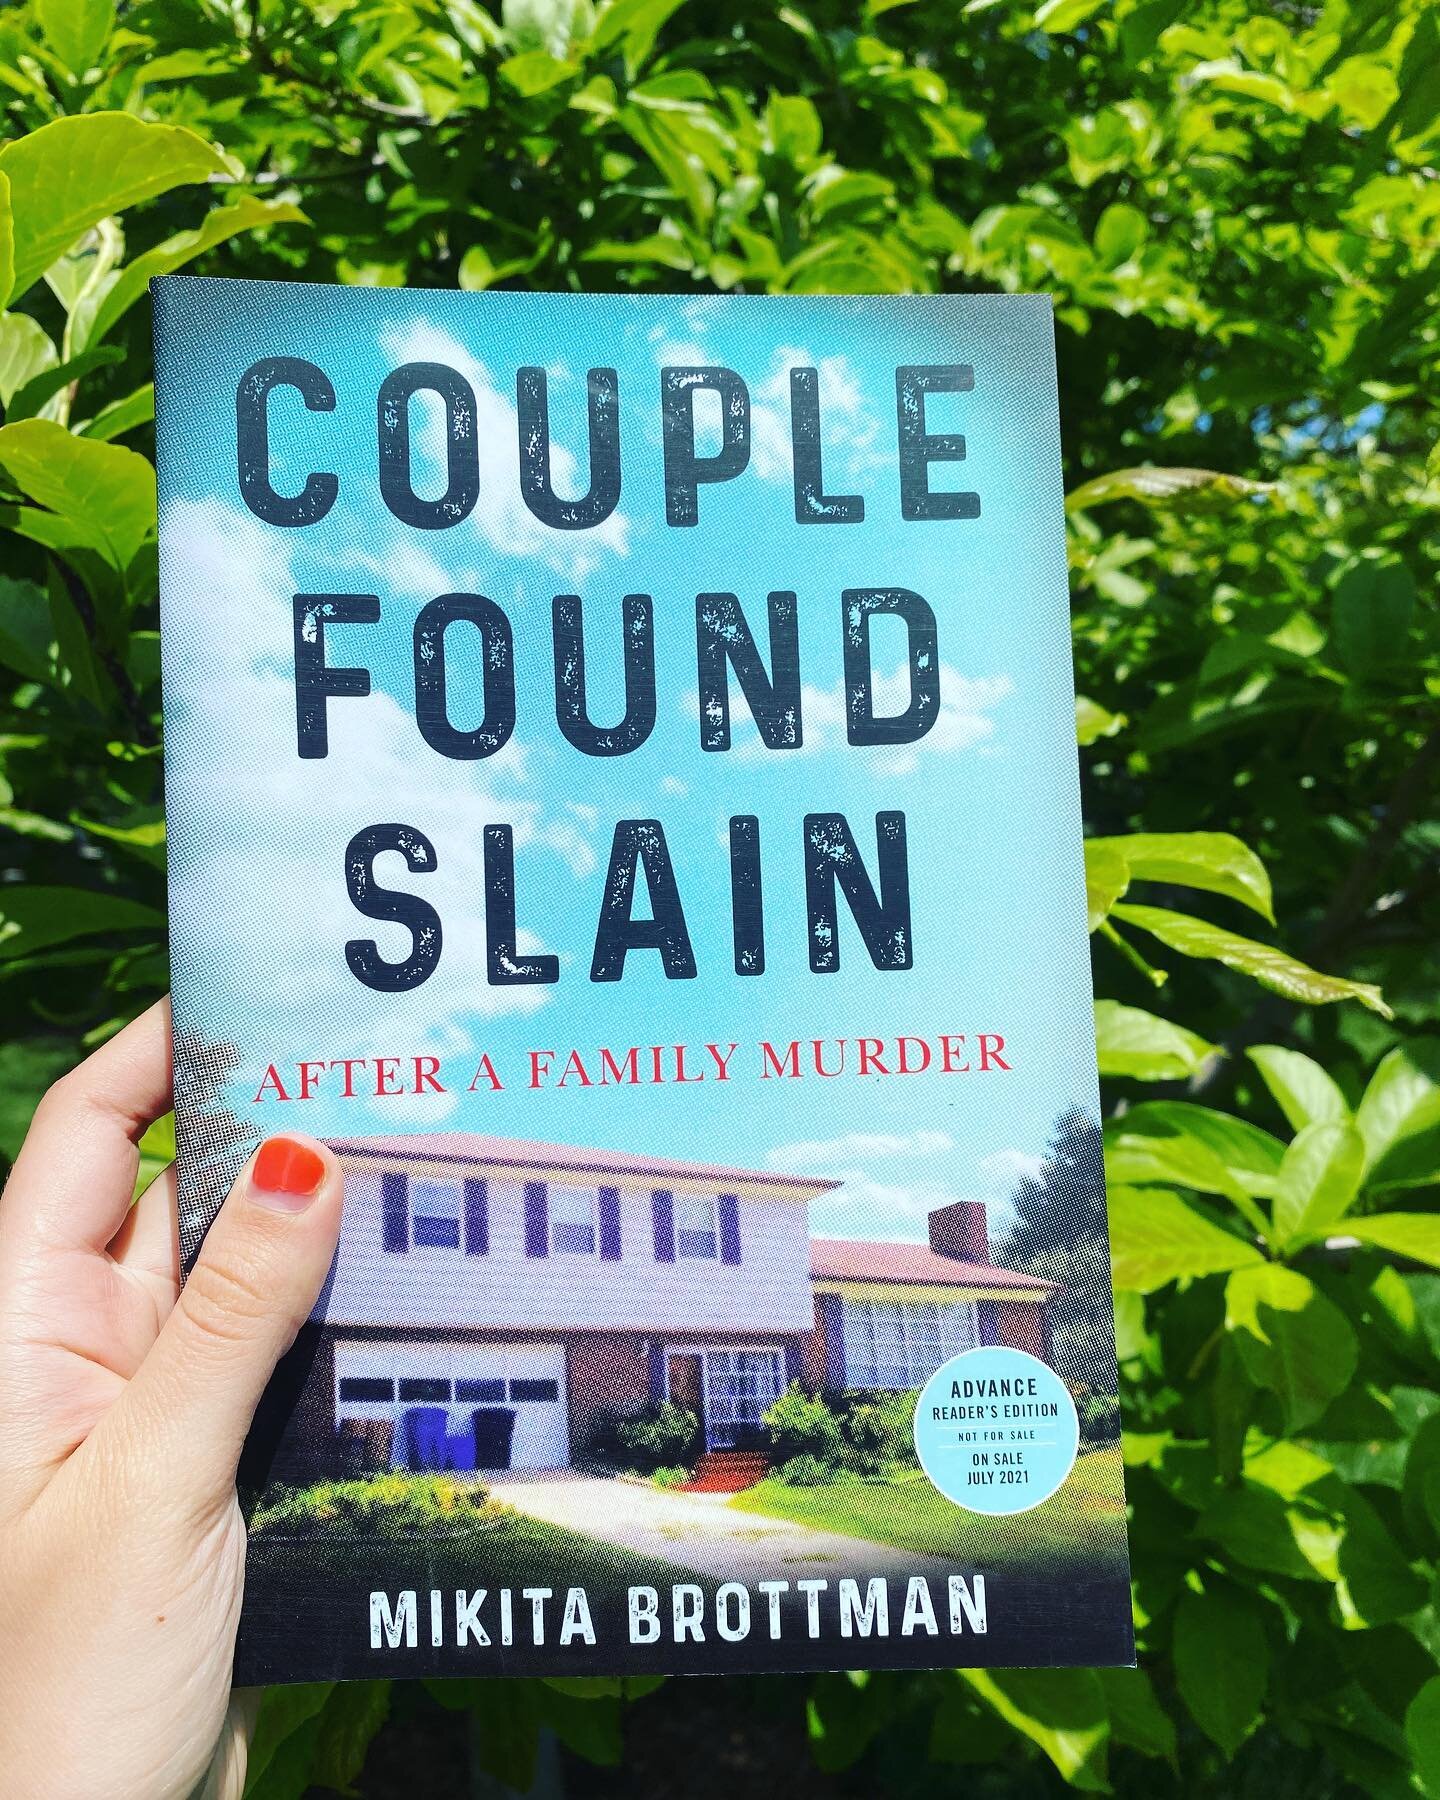 🎉Happy publication week to COUPLE FOUND SLAIN by Mikita Brottman!! It&rsquo;s the perfect true crime book for your #tbr! 

📖&rdquo;True crime deals with the victim&rsquo;s before and after, the community&rsquo;s suffering, the hunt, the cops, the c